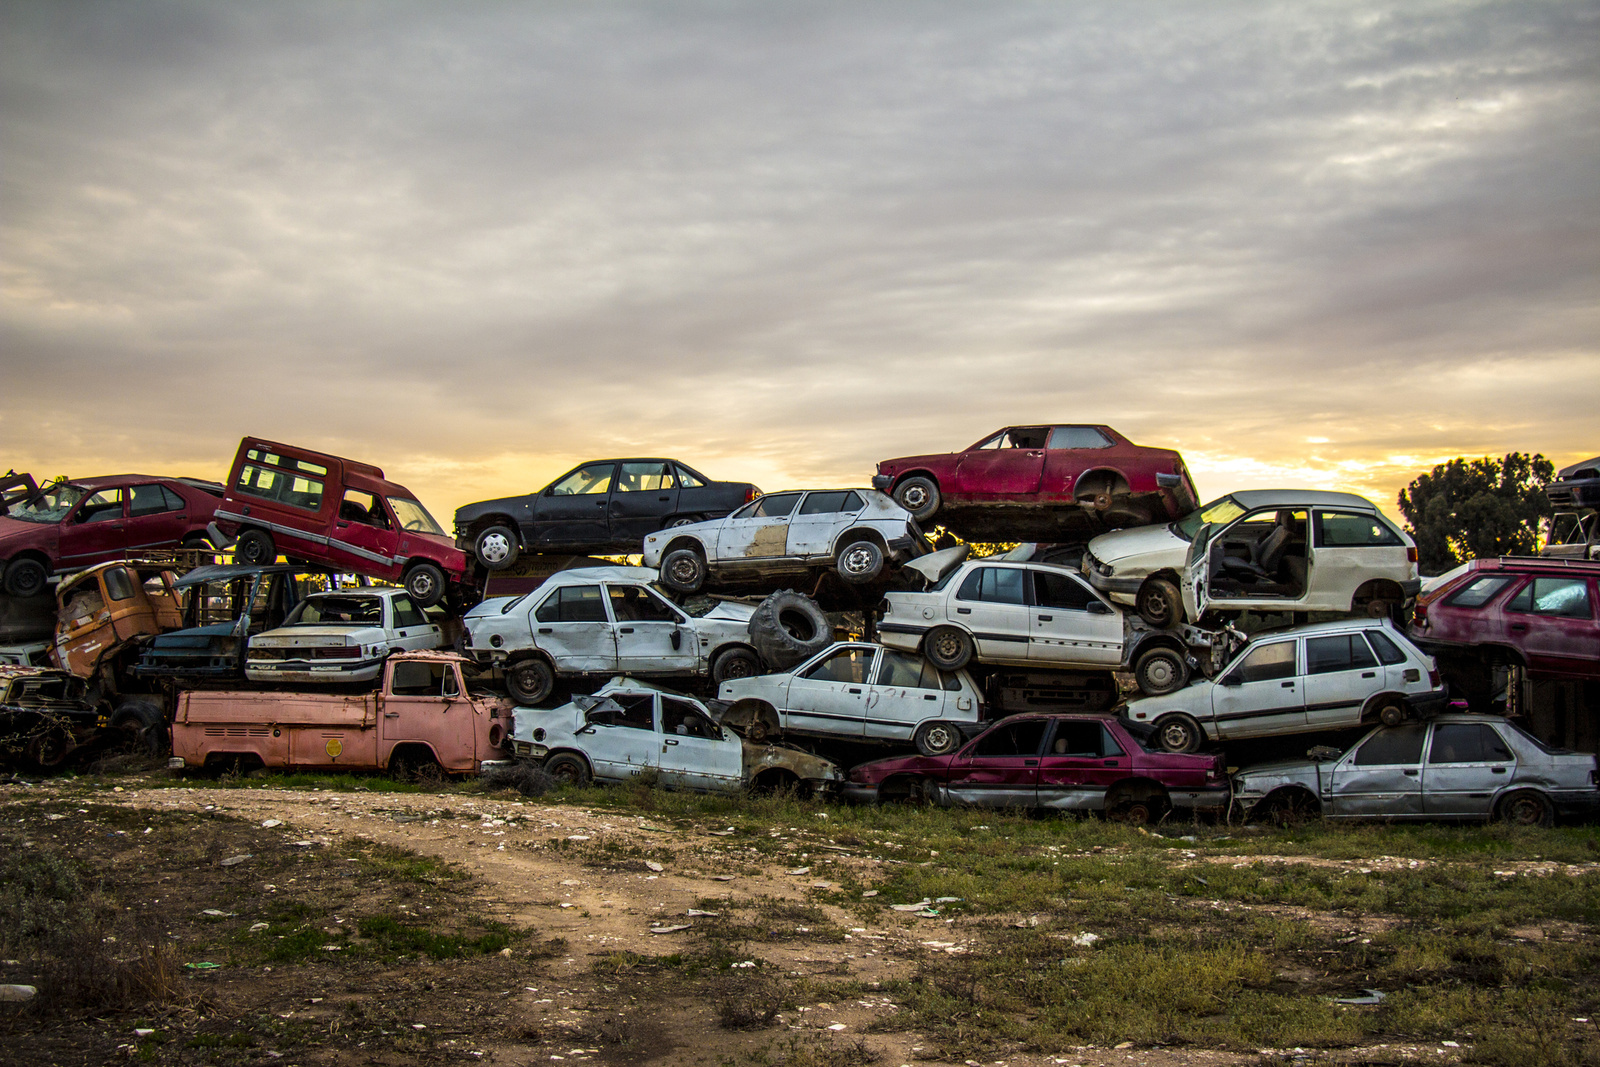 Best Resale Value for your Wrecked Car- Sell junk car - sell car for cash| Sellthecars